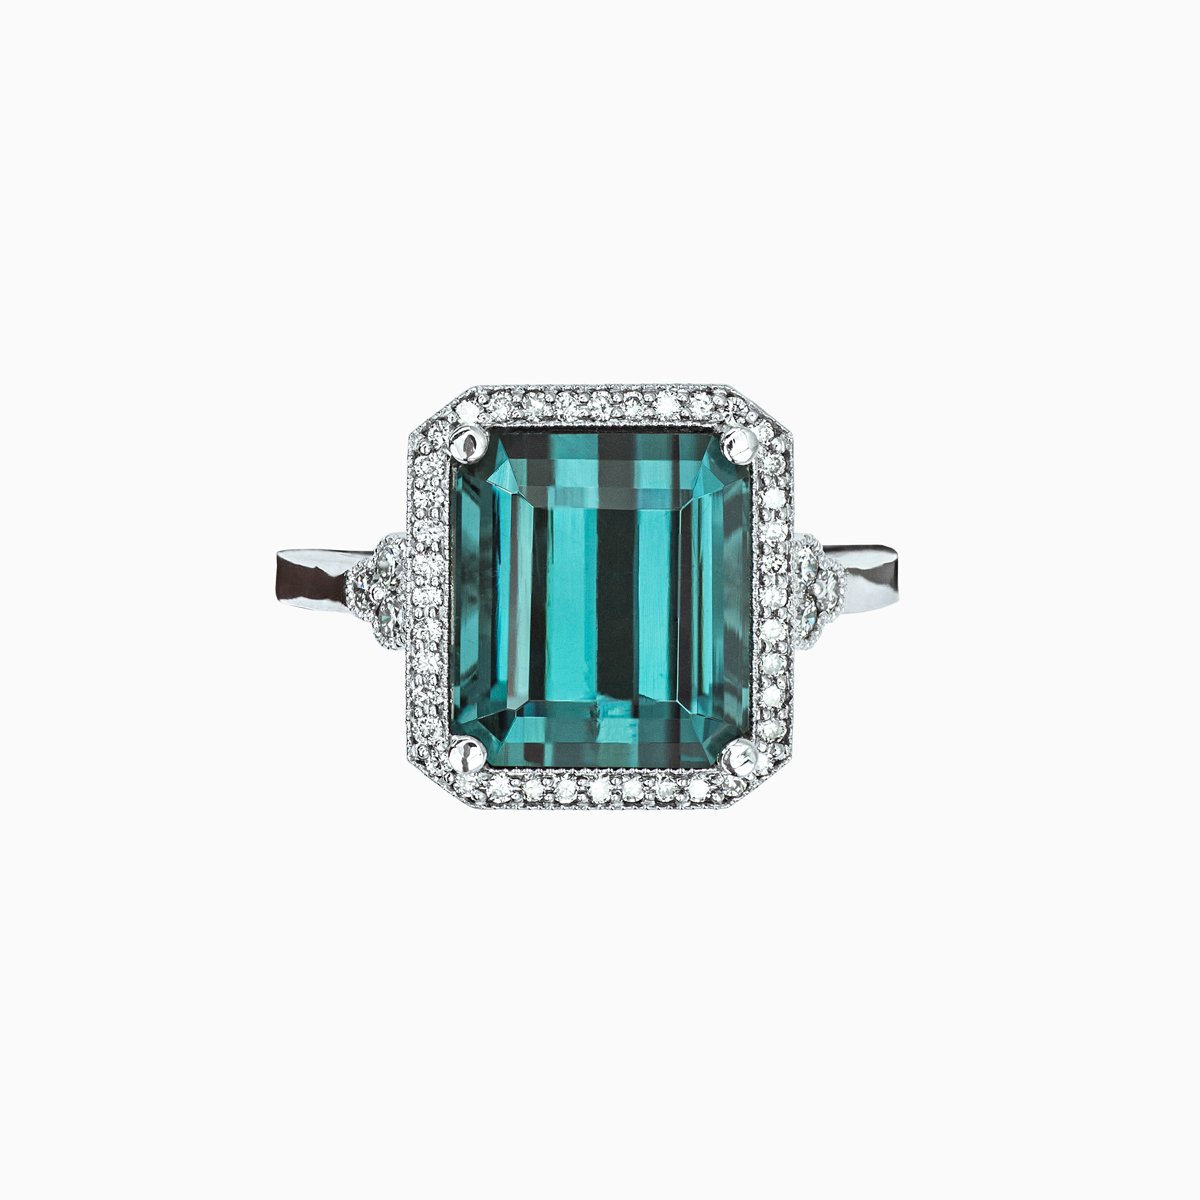 Cathedral Halo Cluster Ring in 18k White Gold with Mined Emerald Shaped Teal Blue-Green Tourmaline and Colorless Diamonds